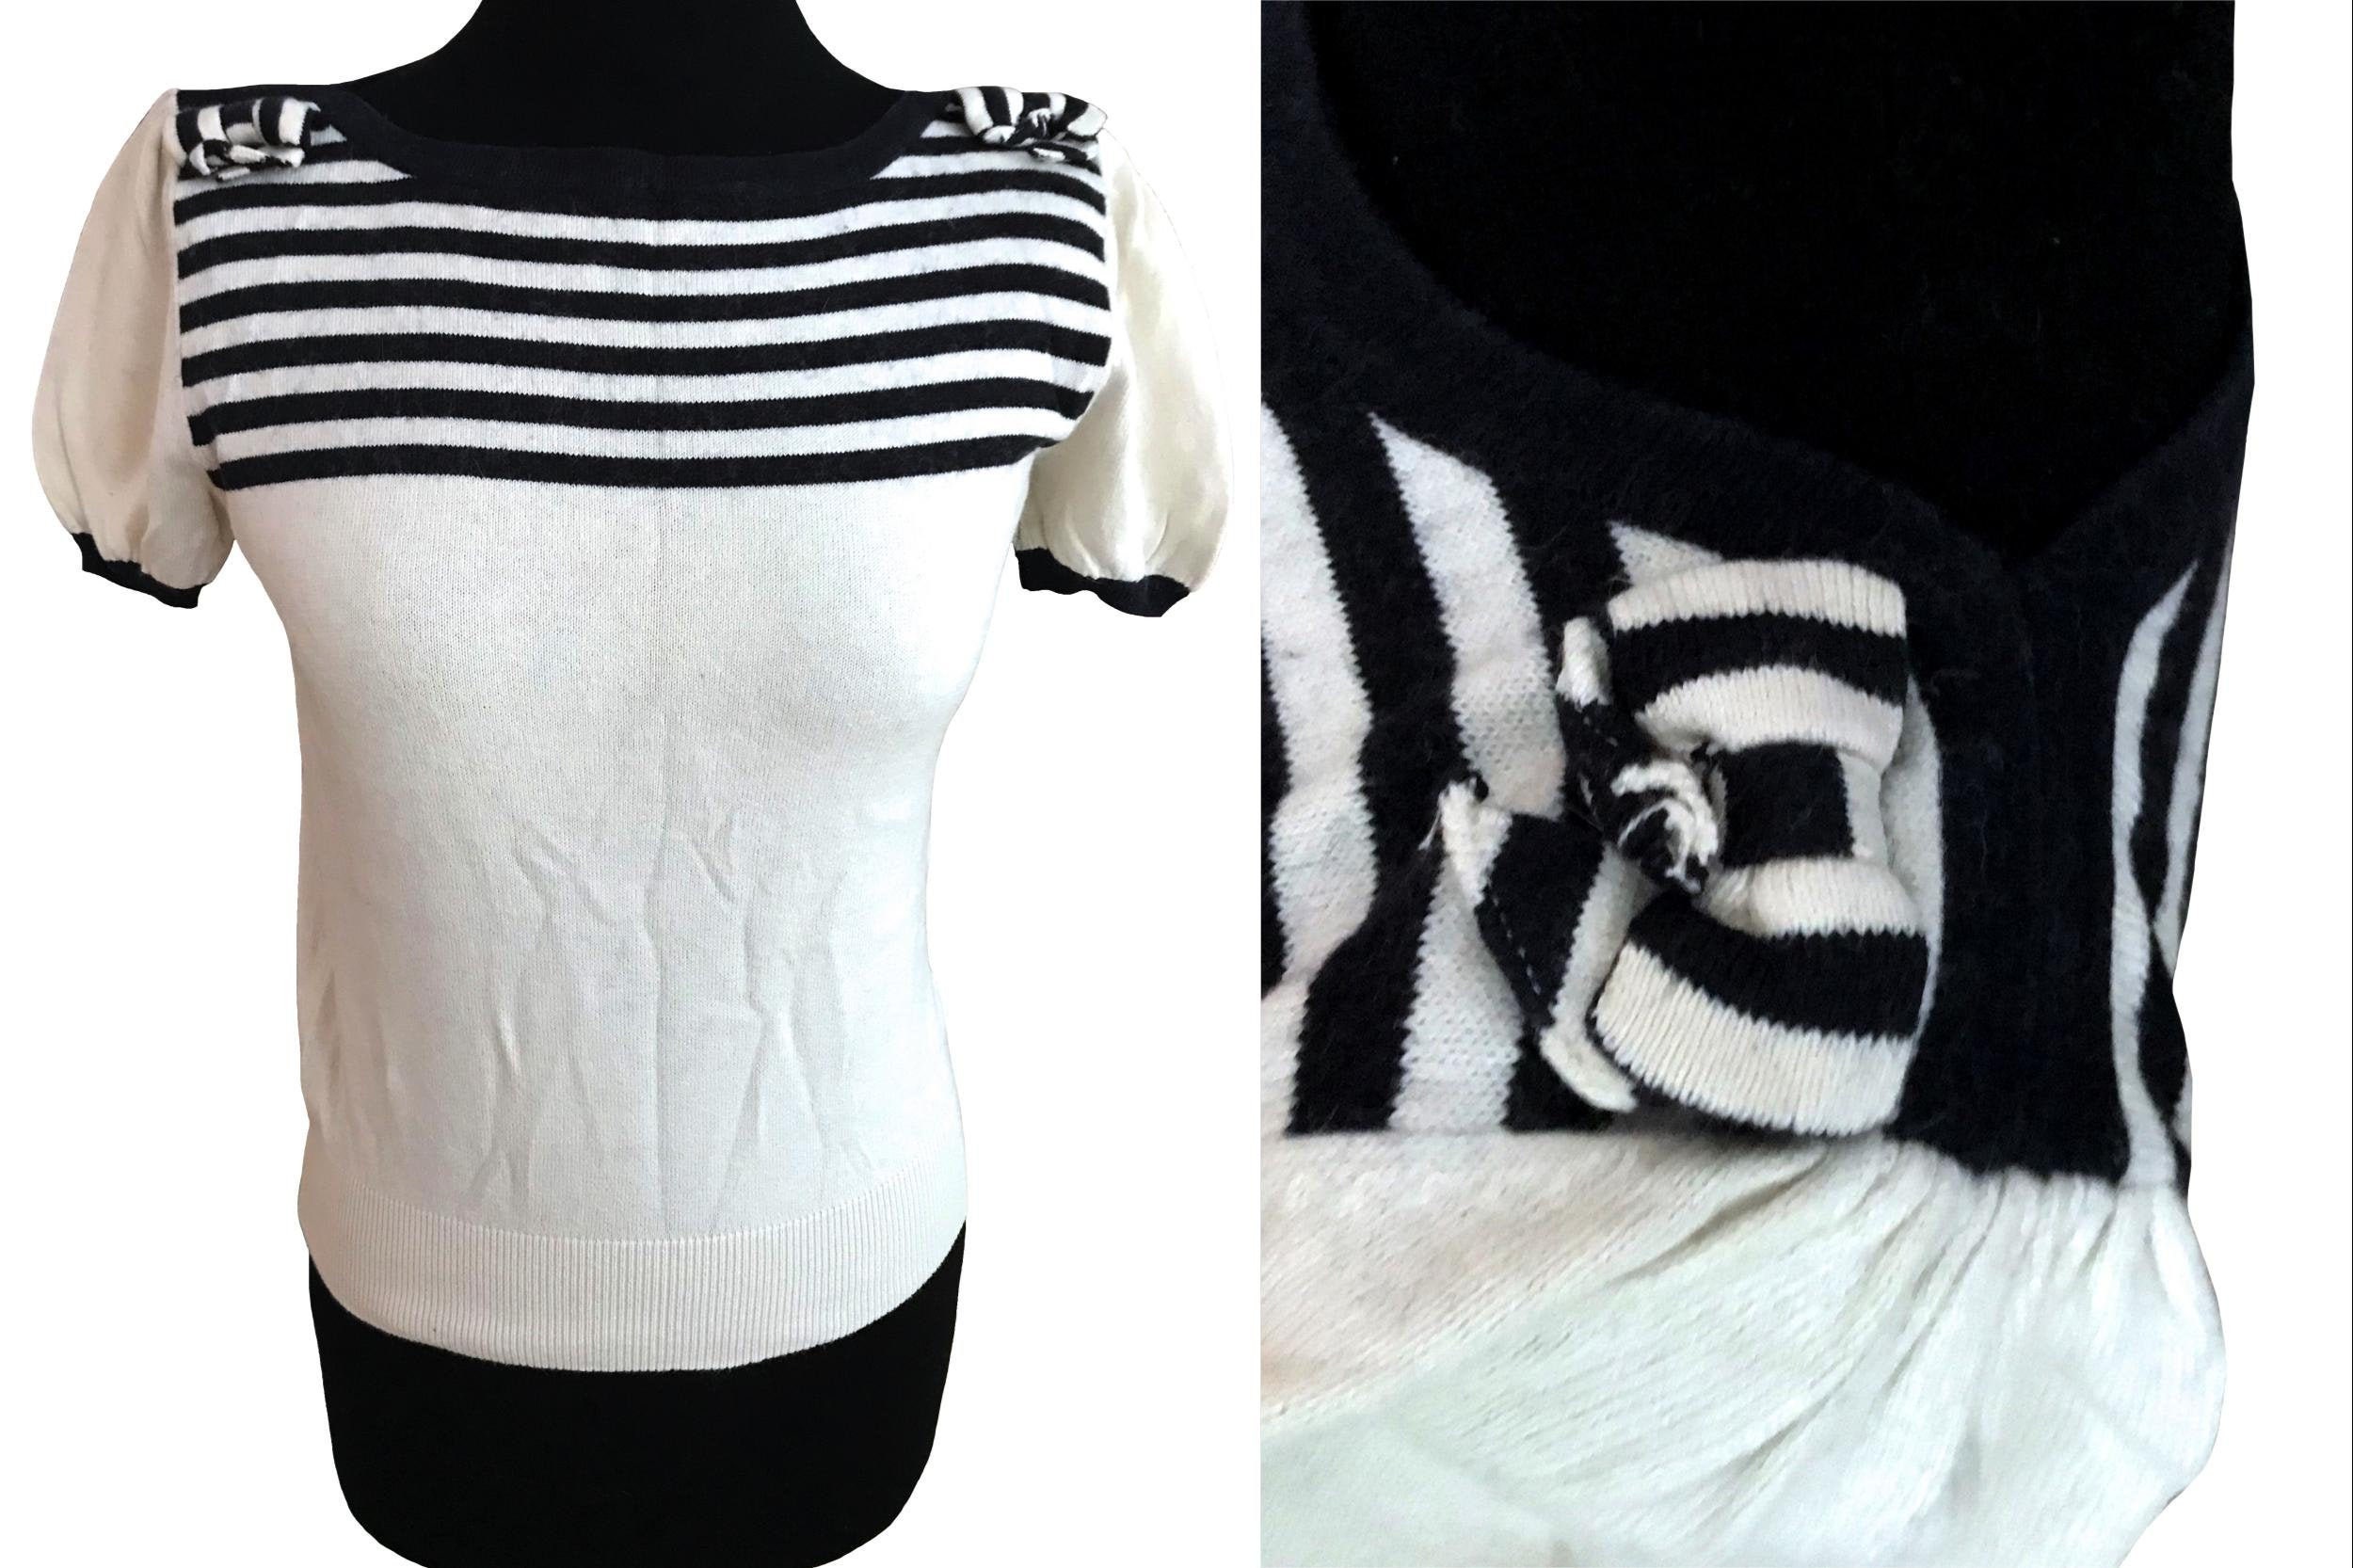 Cotton & Angora Blend Fine Knit Nautical Top, Navy & Cream Striped T-Shirt Top With Bow Trim Details, Boat Neck Sailor Short Sleeve S